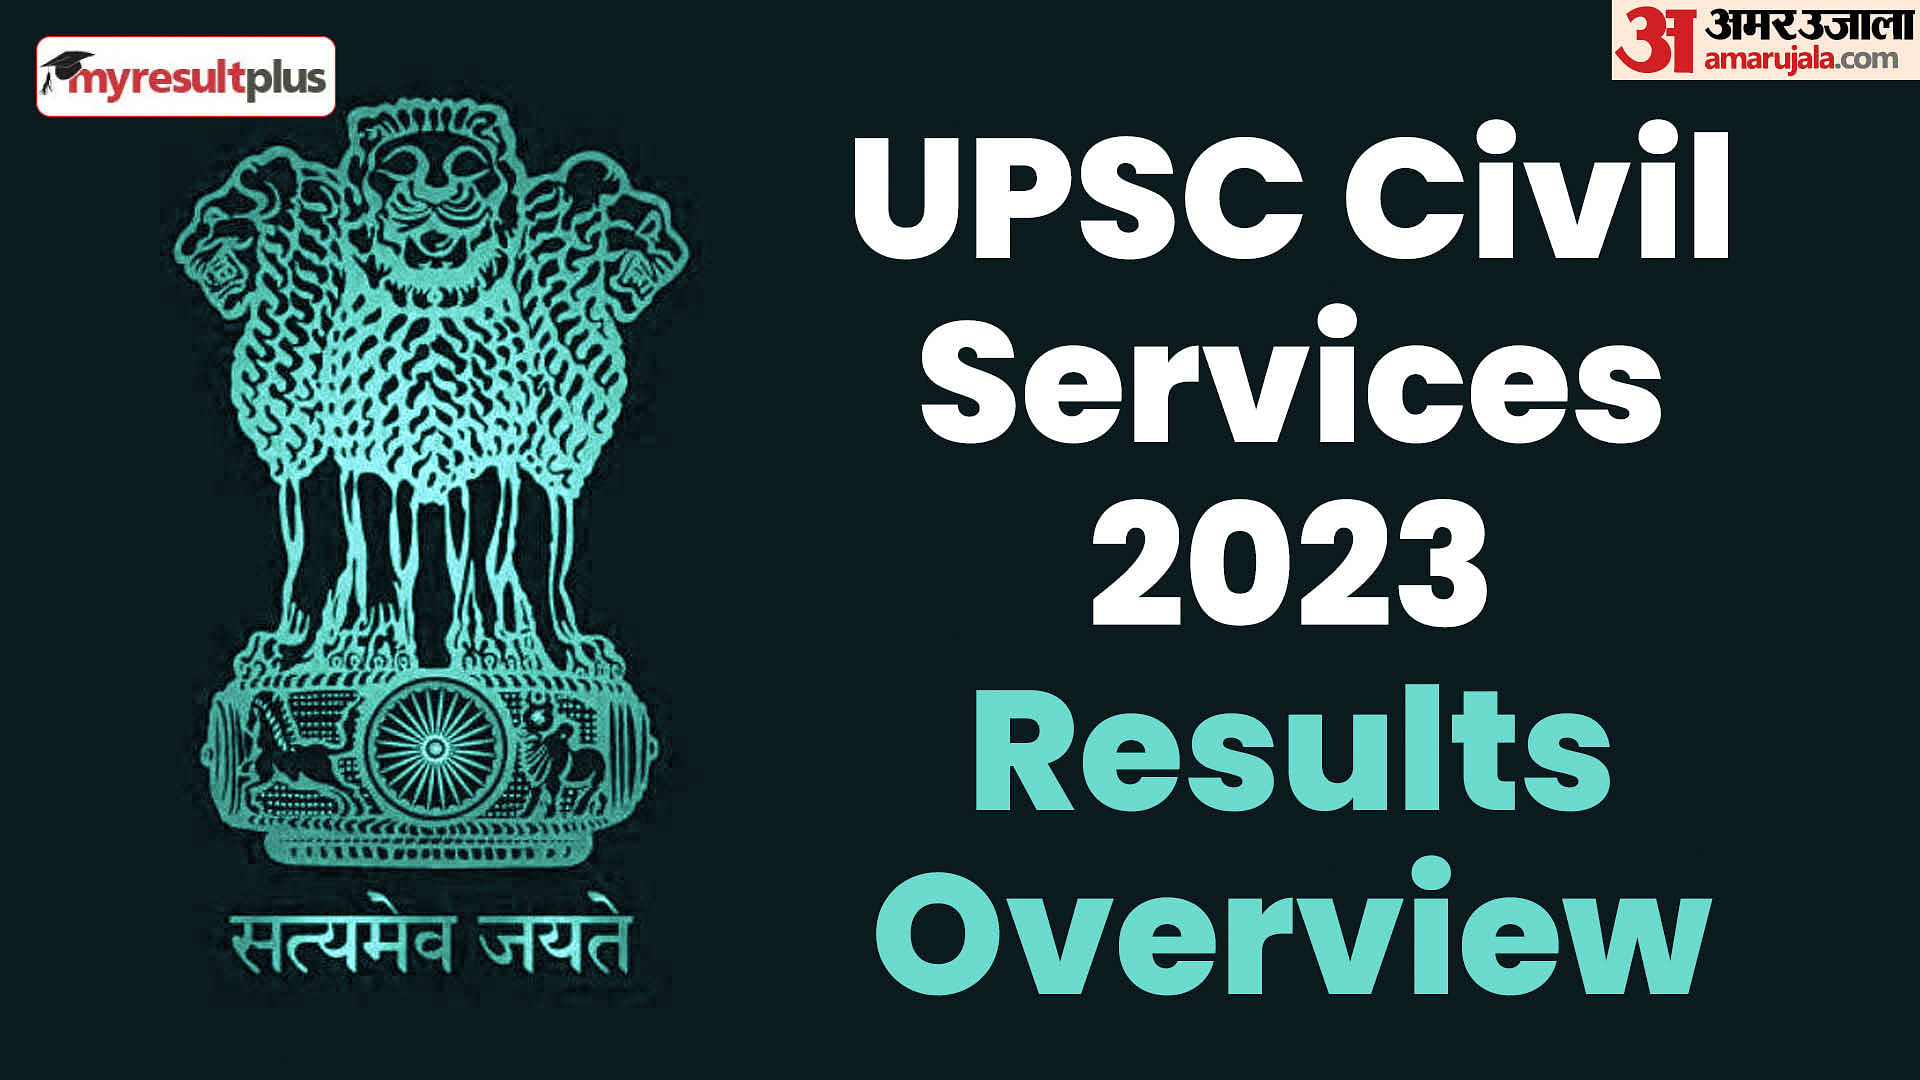 UPSC CSE 2023 Final Result: 1016 candidates cleared UPSC exam, Read the overview of result here